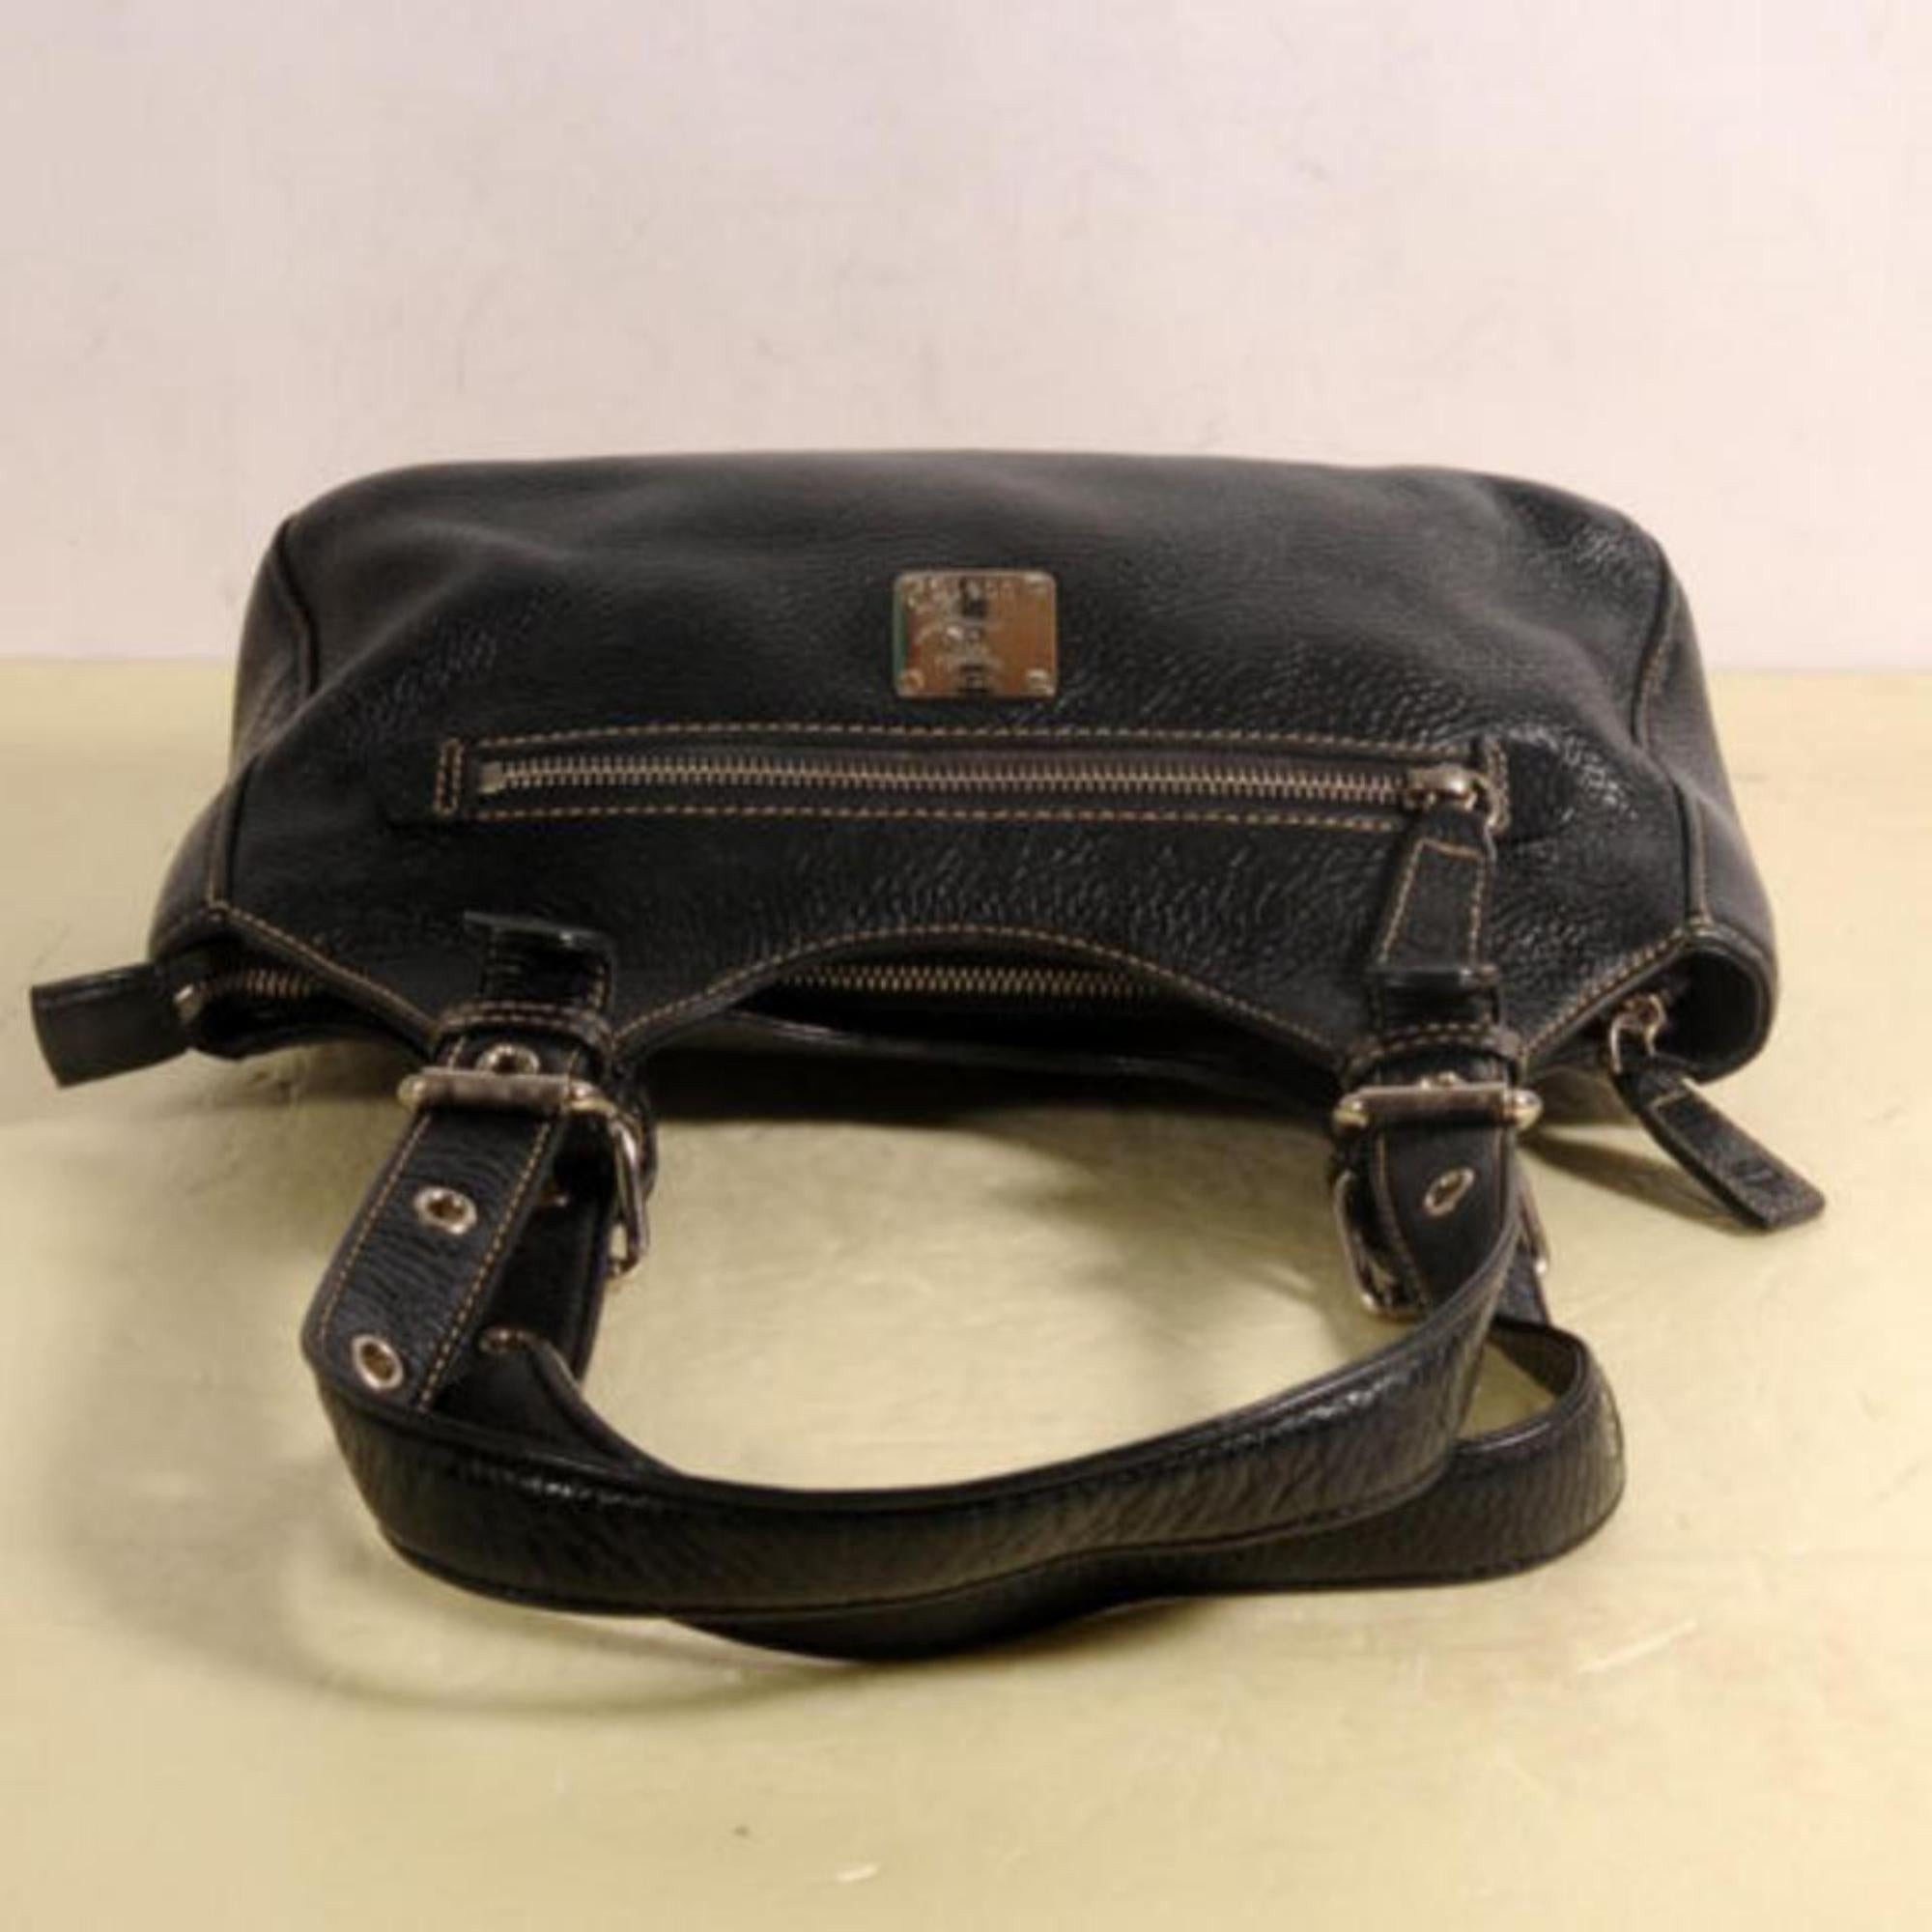 MCM 869327 Black Leather Shoulder Bag In Good Condition For Sale In Forest Hills, NY